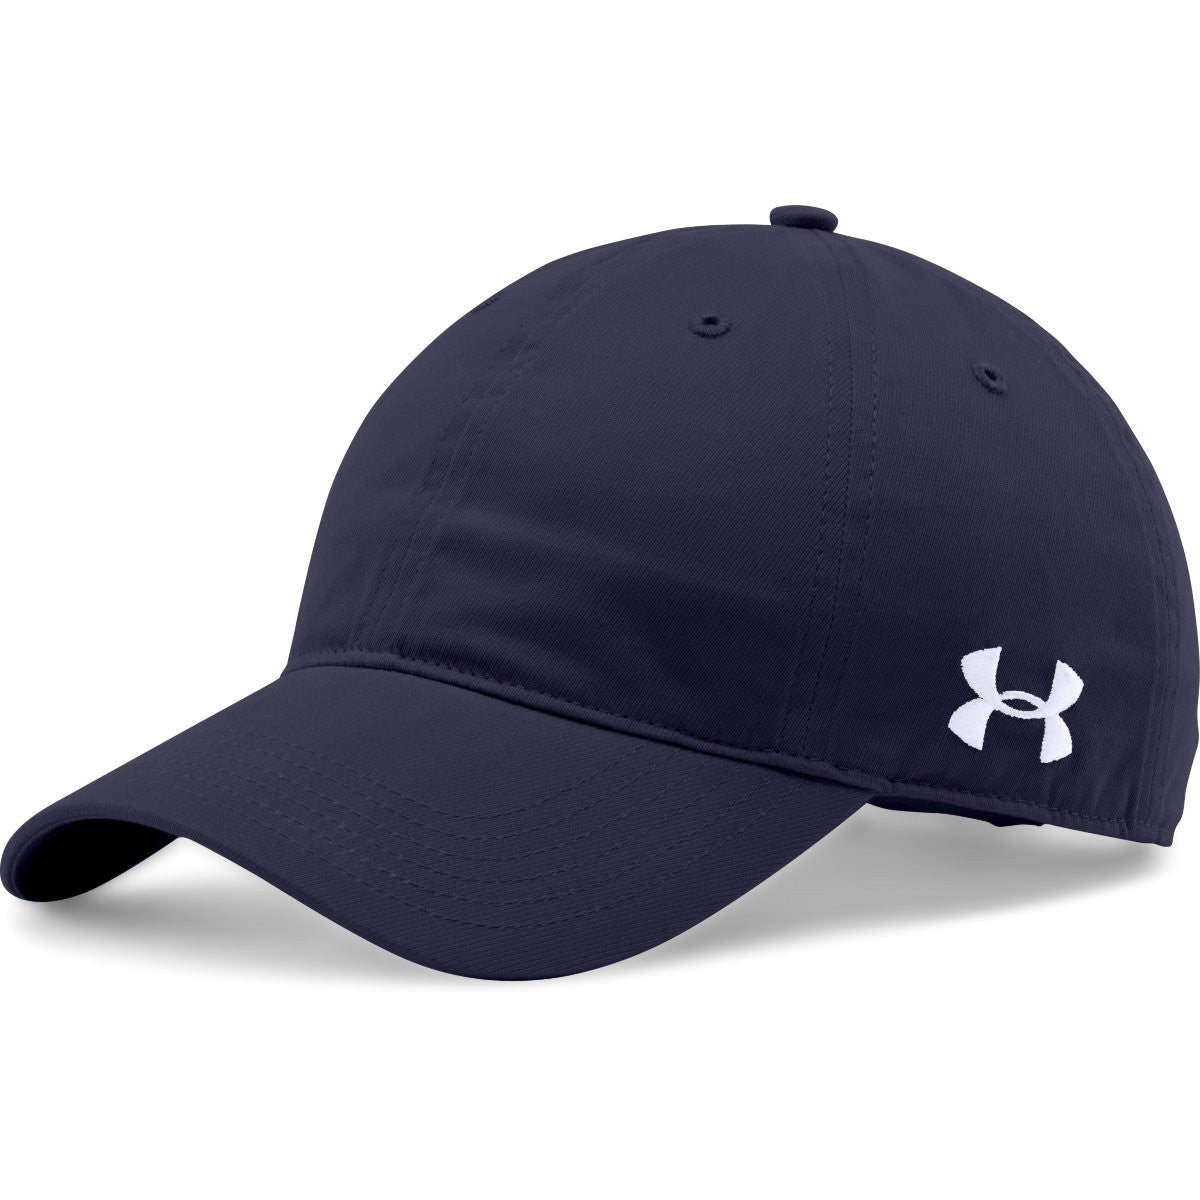 Under Armour Midnight Navy Relaxed Cap